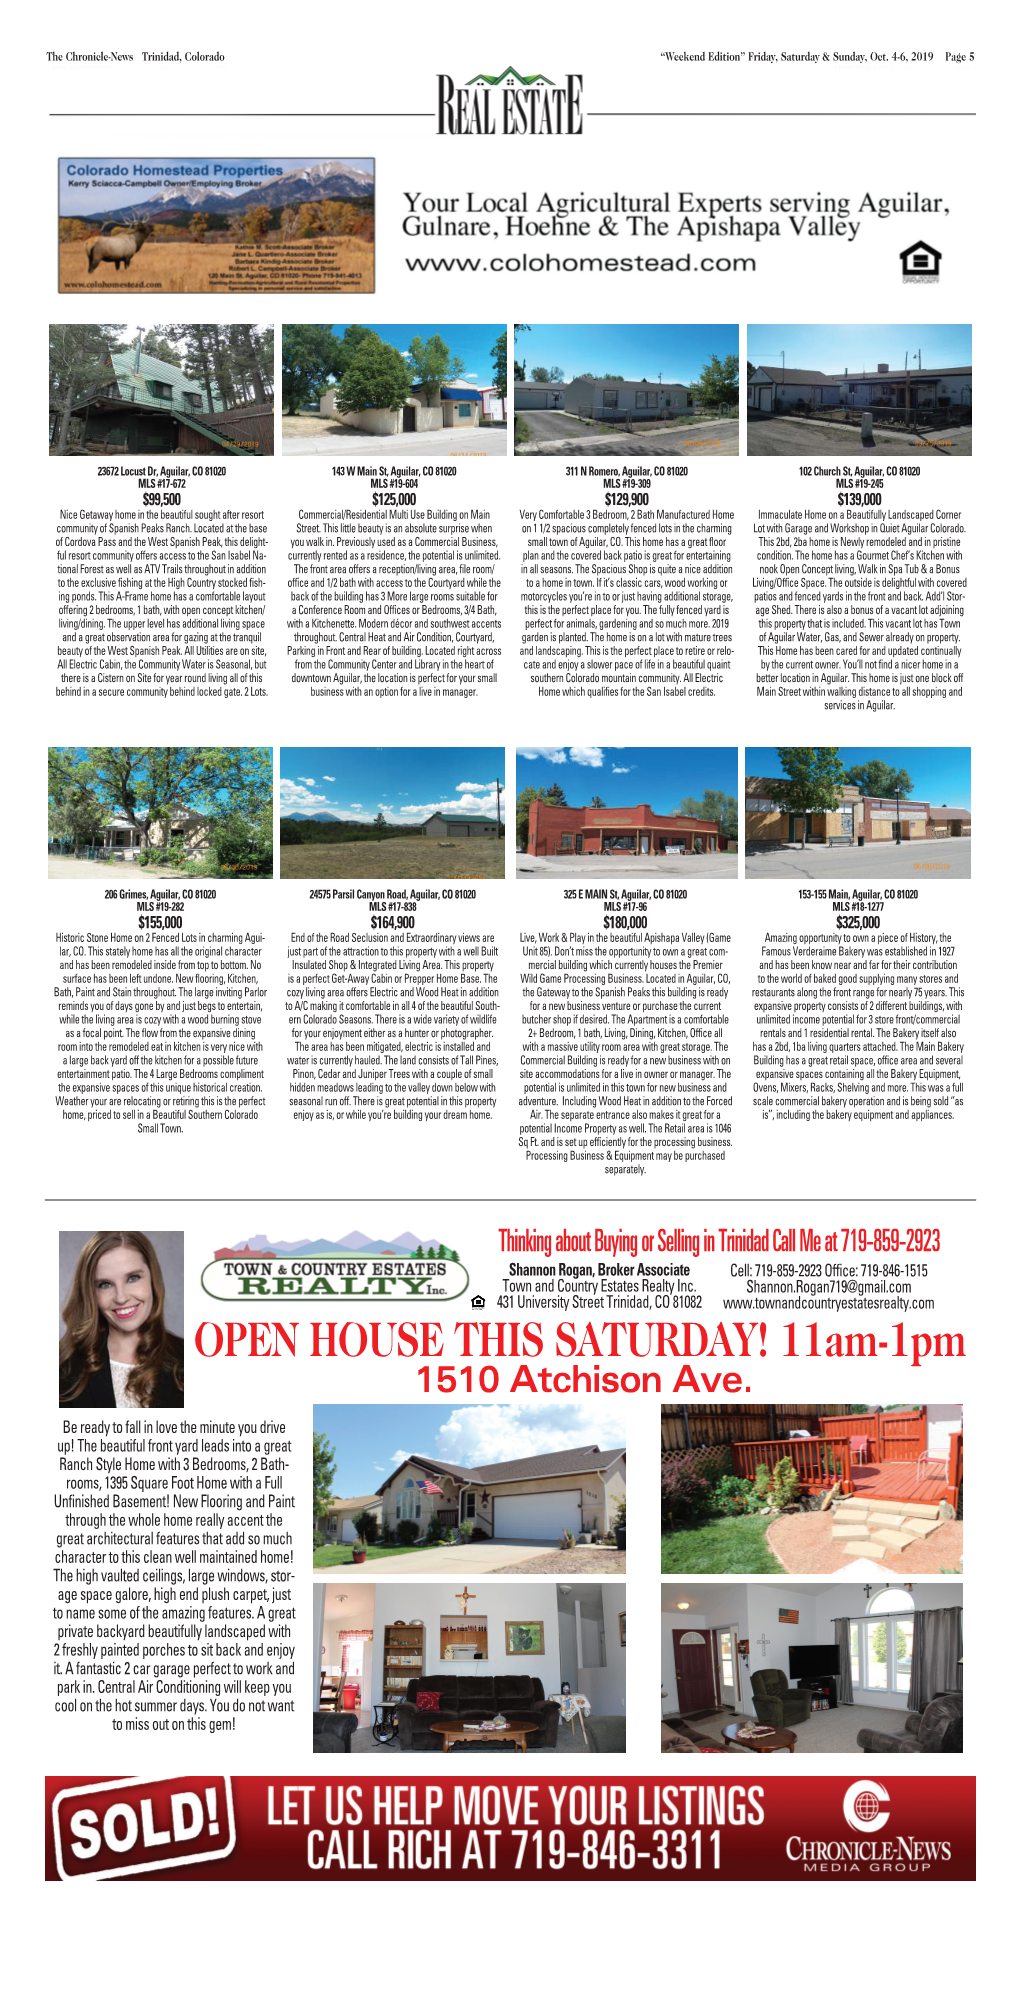 OPEN HOUSE THIS SATURDAY! 11Am-1Pm 1510 Atchison Ave